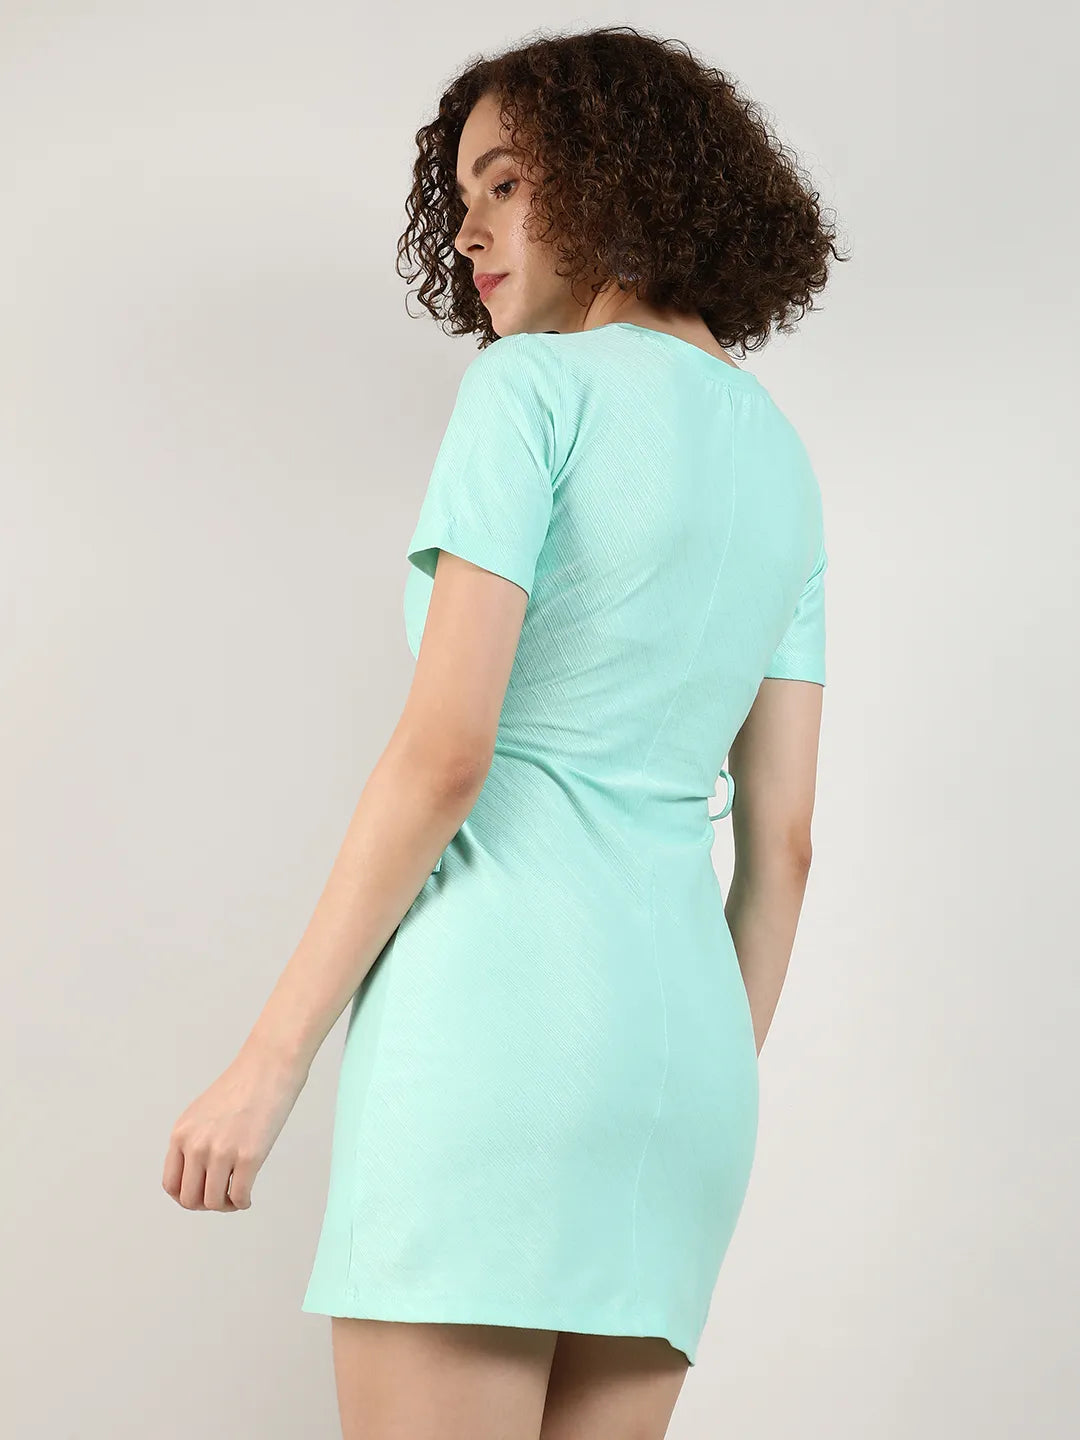 Women's Solid Dress With Cutout Detail